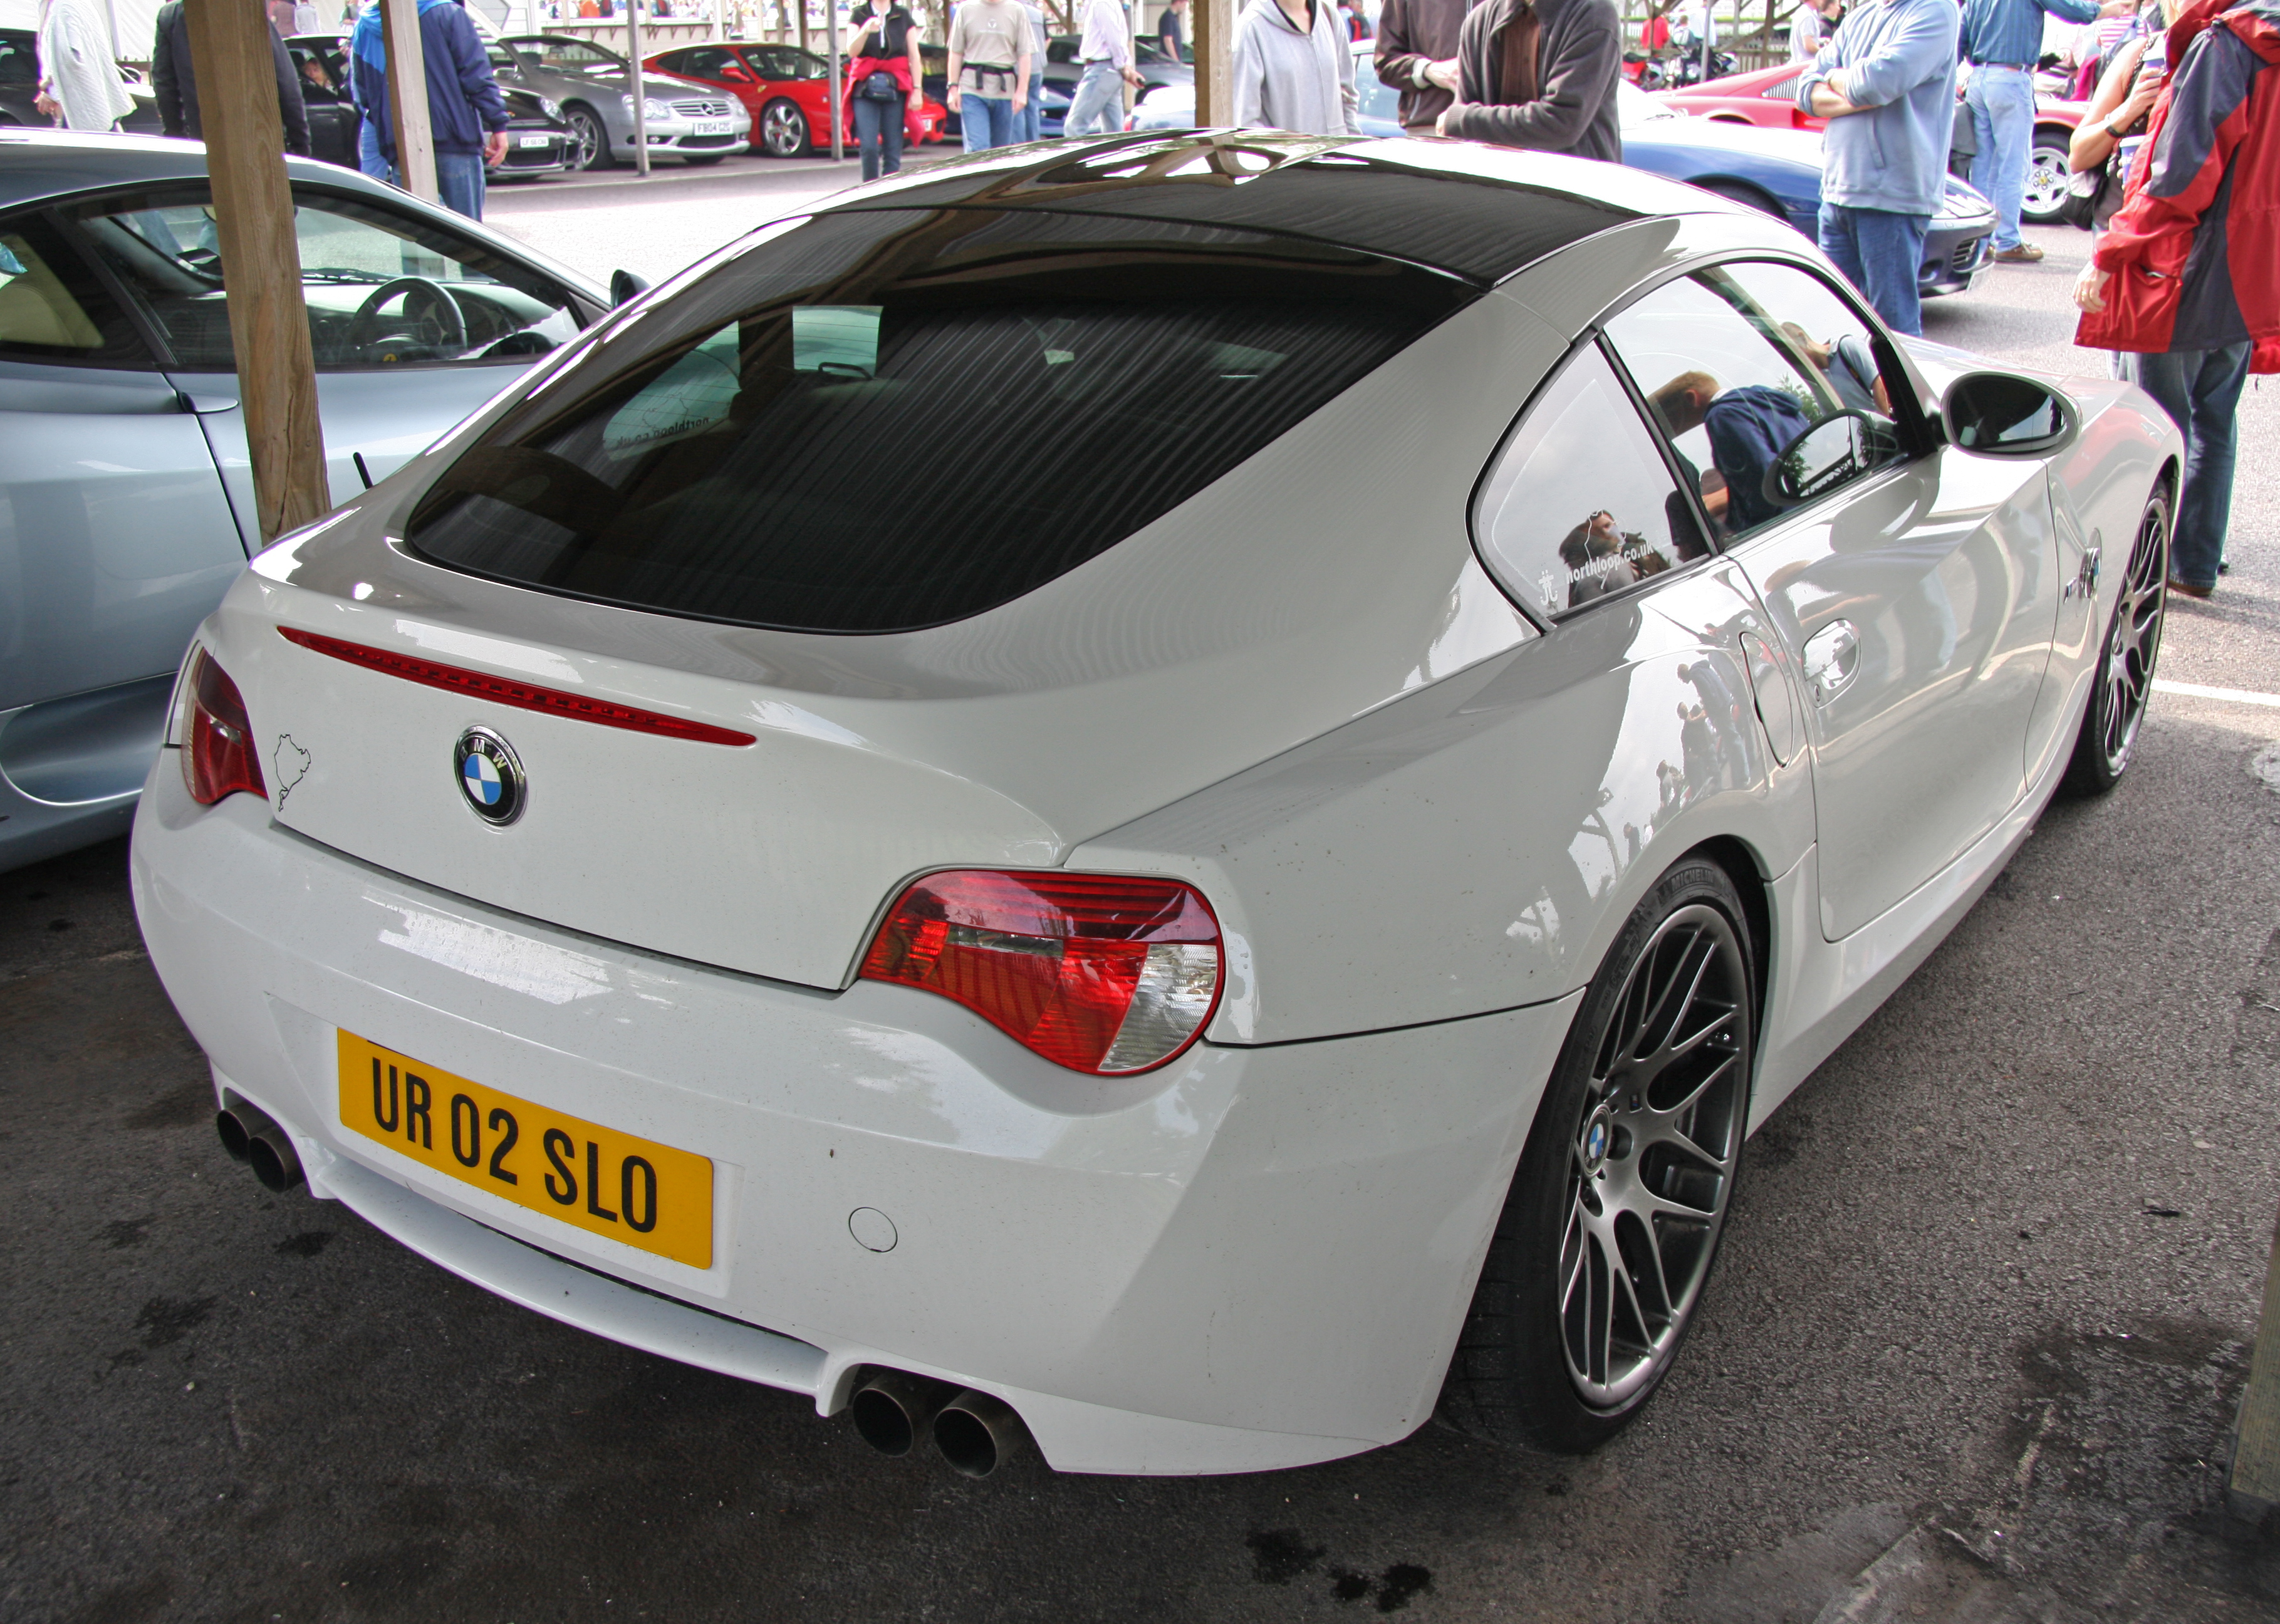 File:BMW Z4 M Coupe - Flickr - exfordy.jpg - Wikimedia Commons